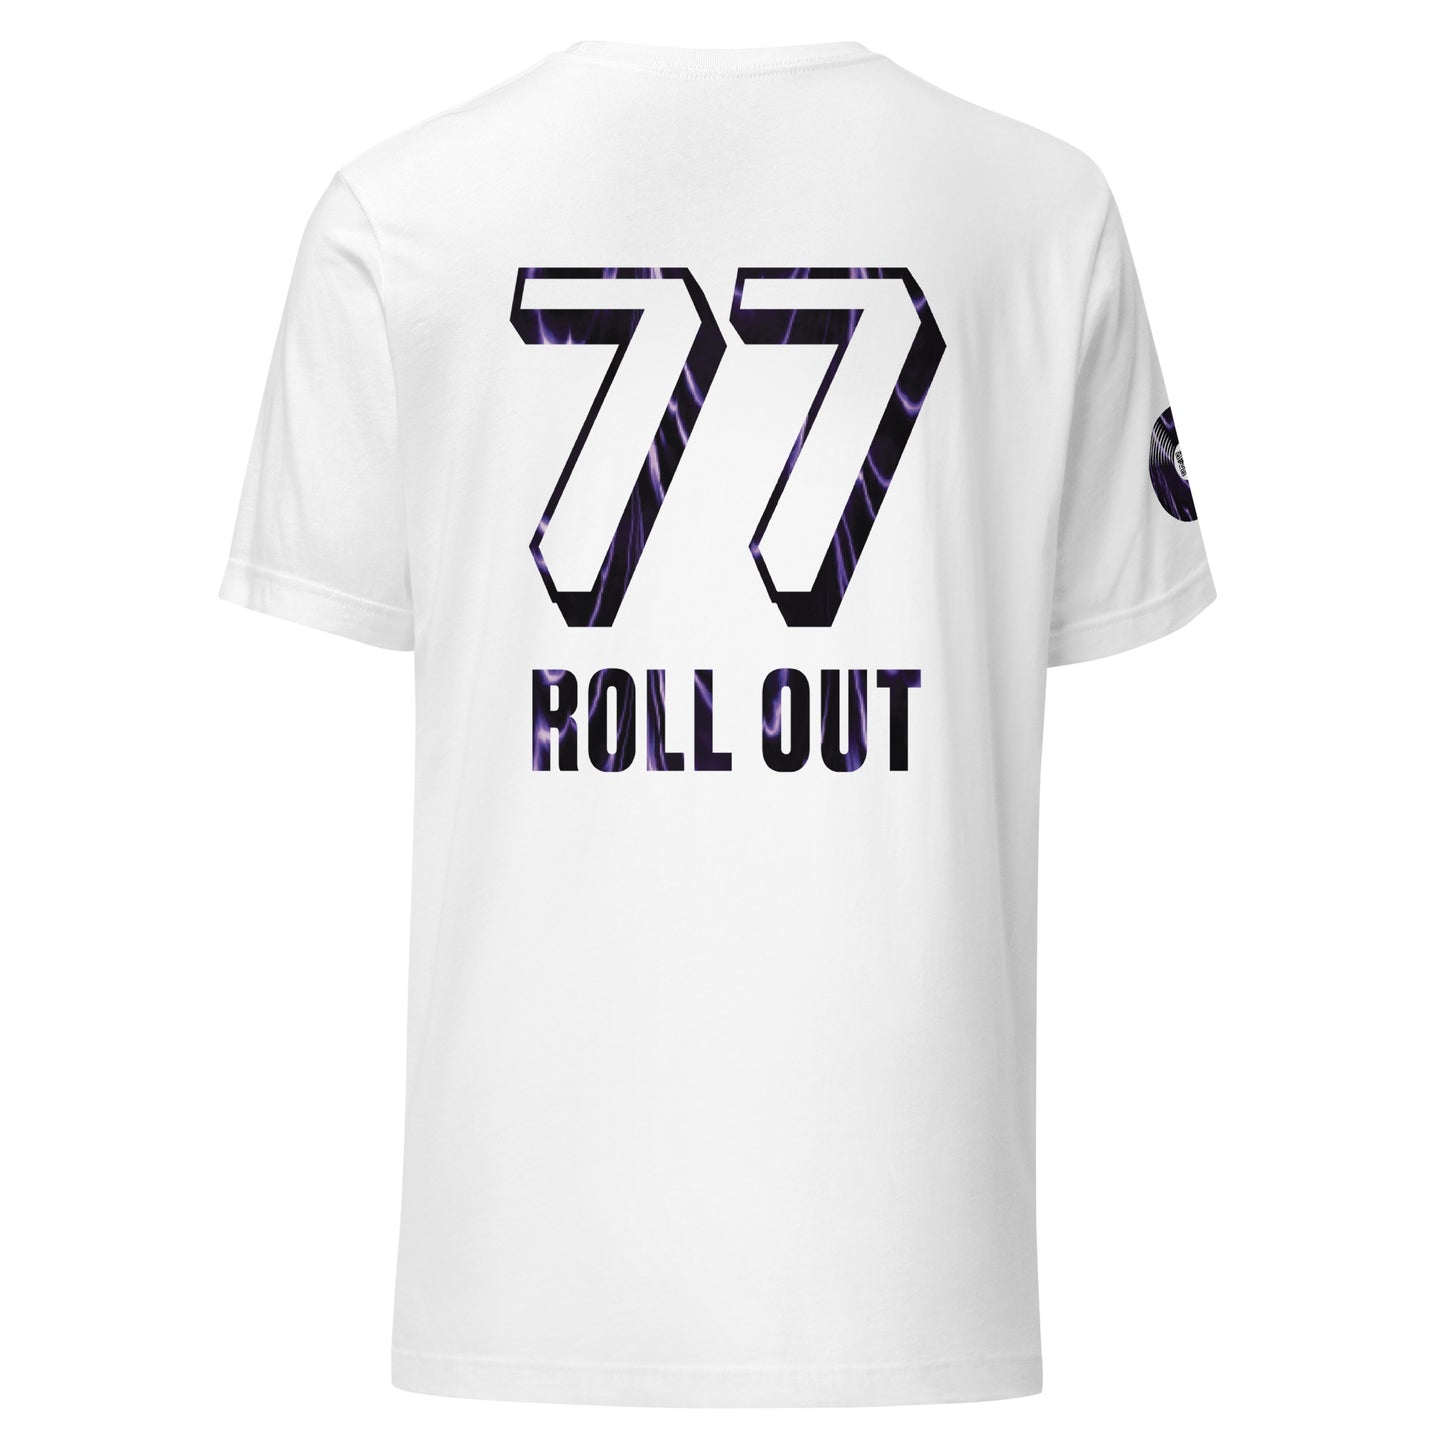 Roll Out 77 Tee - White / Multicolor